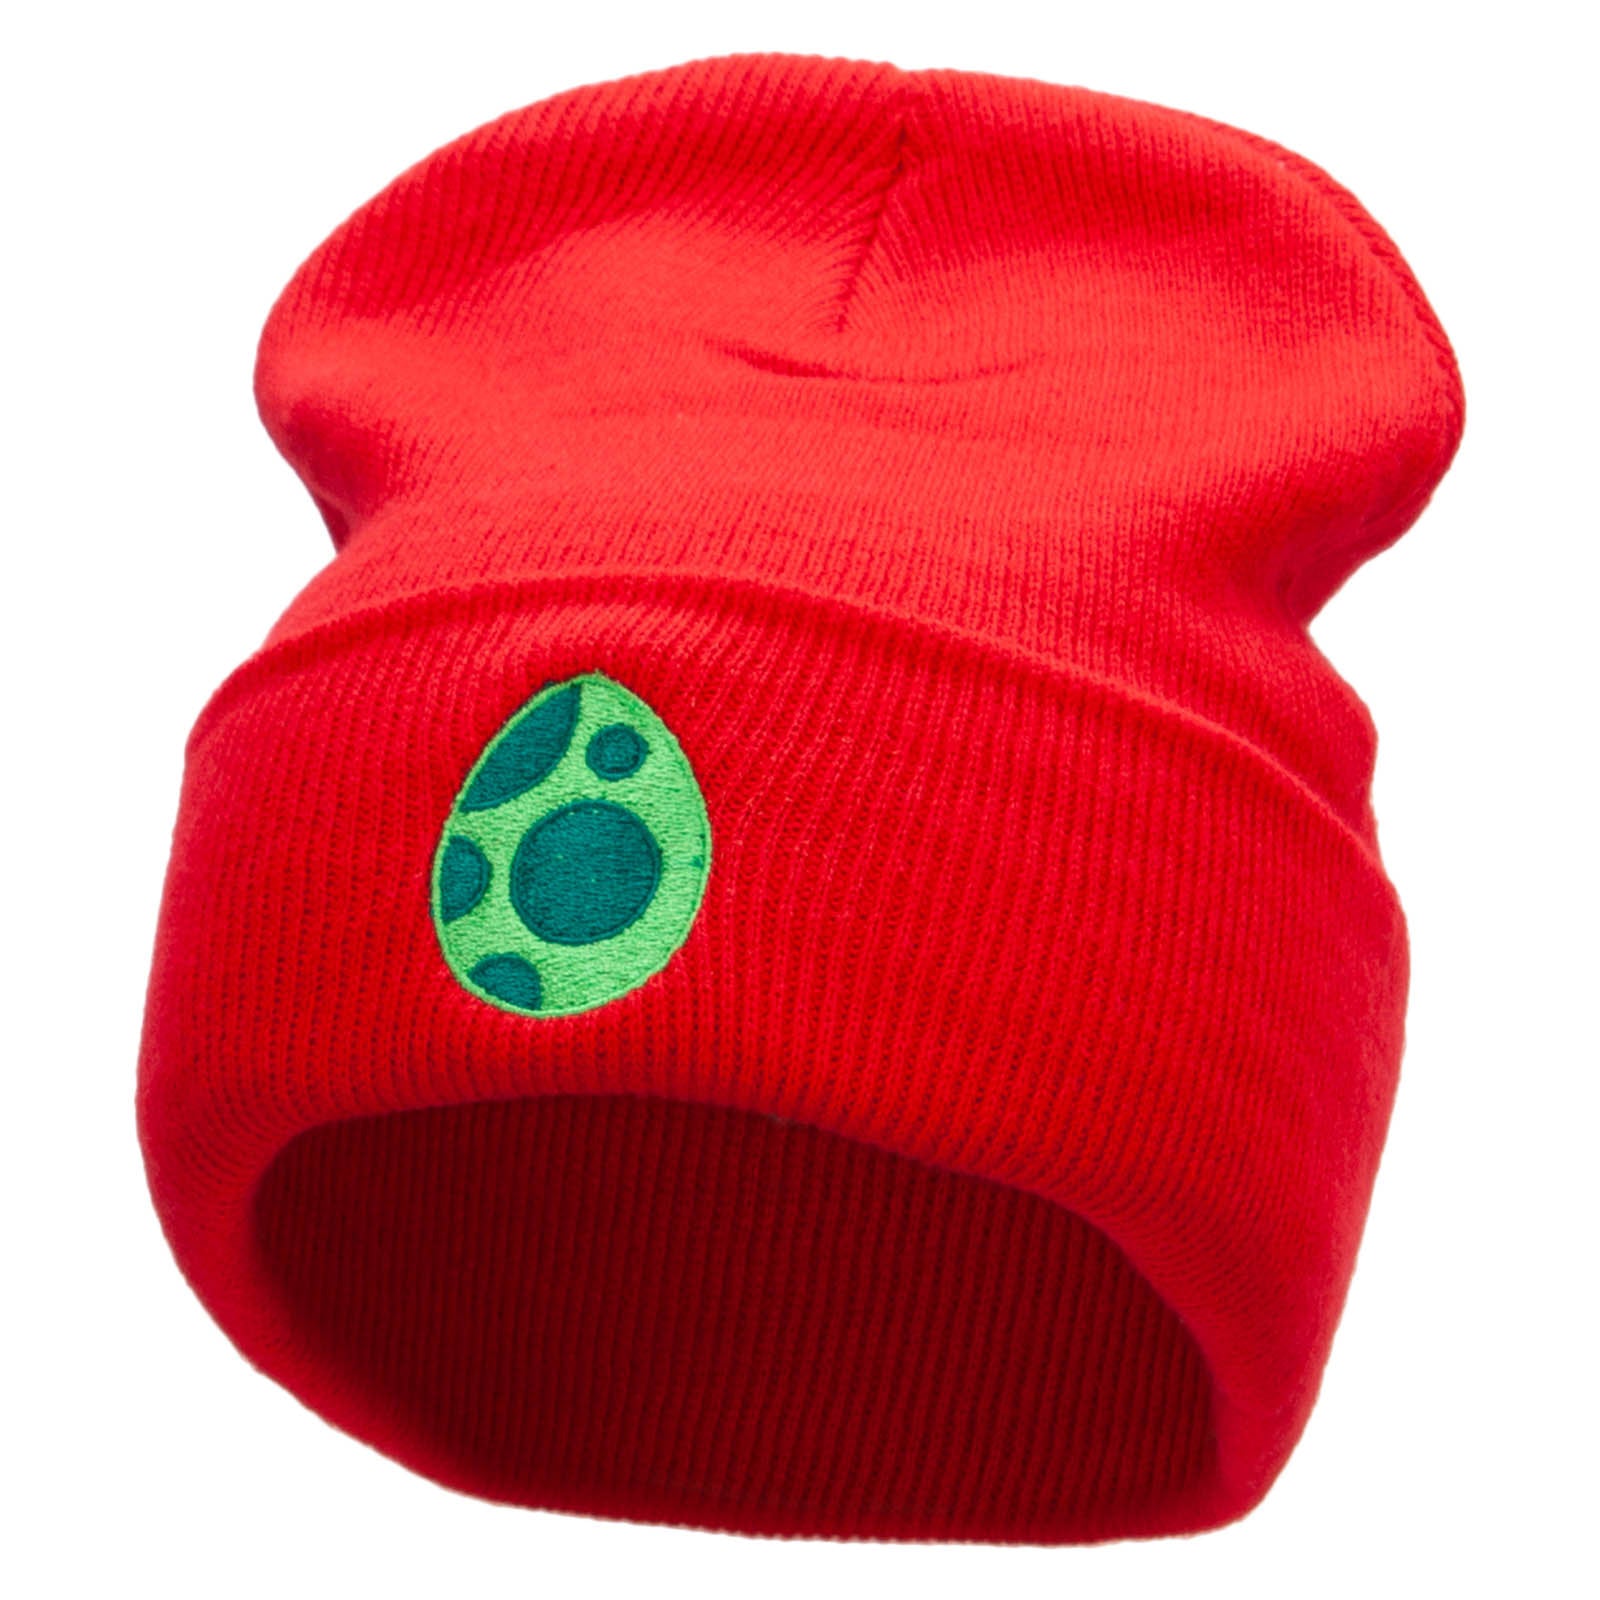 Spotted Egg Embroidered 12 Inch Long Knitted Beanie - Red OSFM